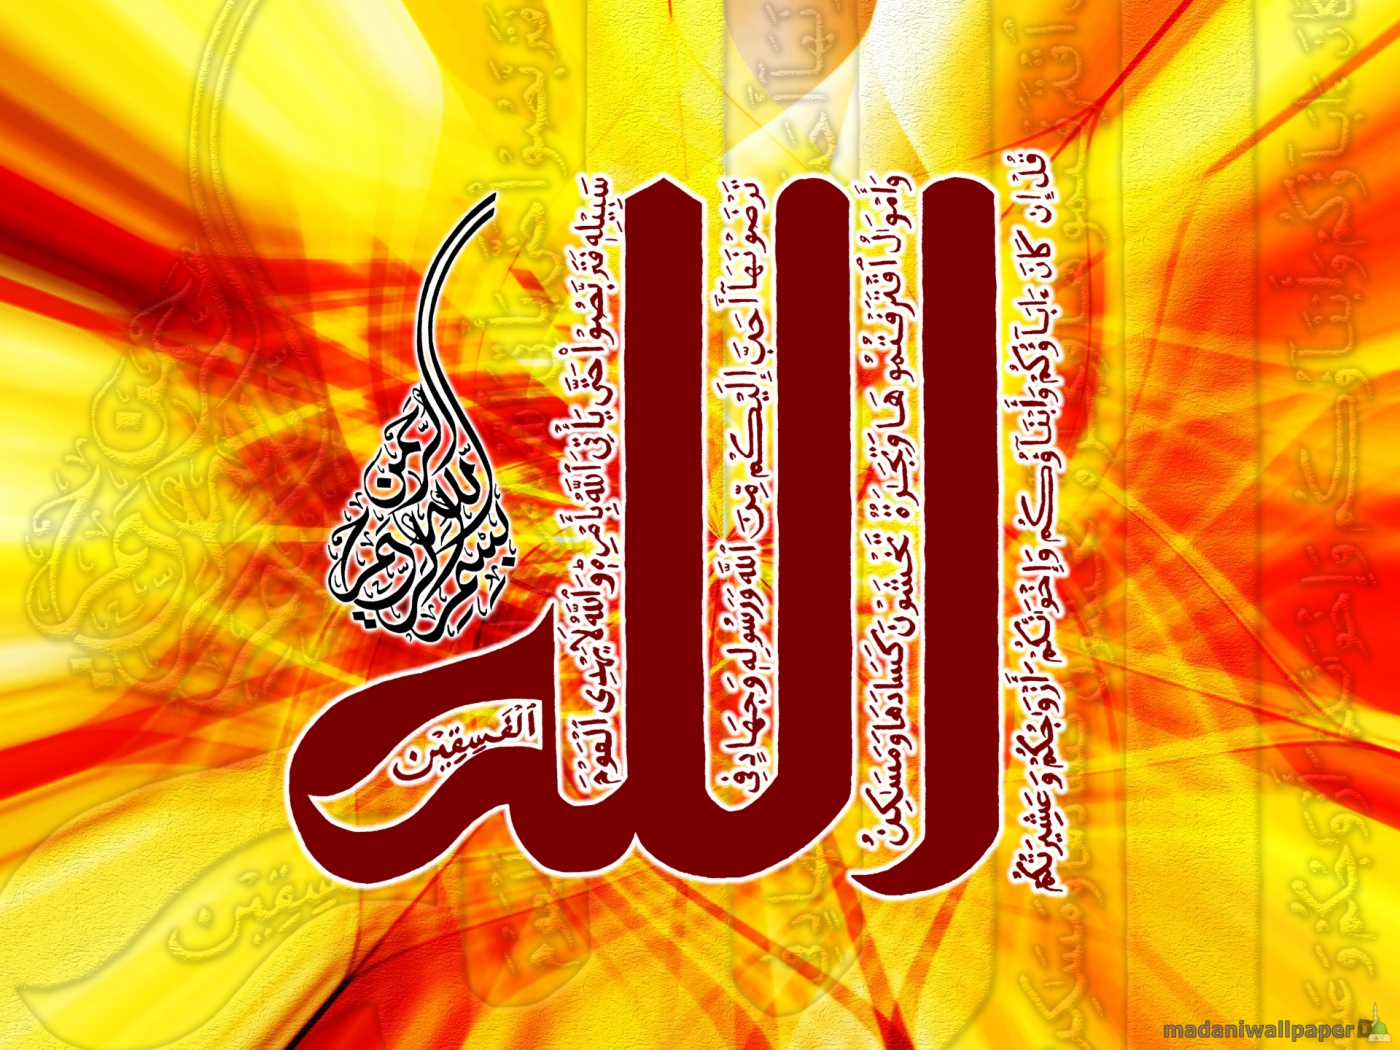 How to set Islamic Calligraphy Top HD Wallpaper 2013 wallpaper on your